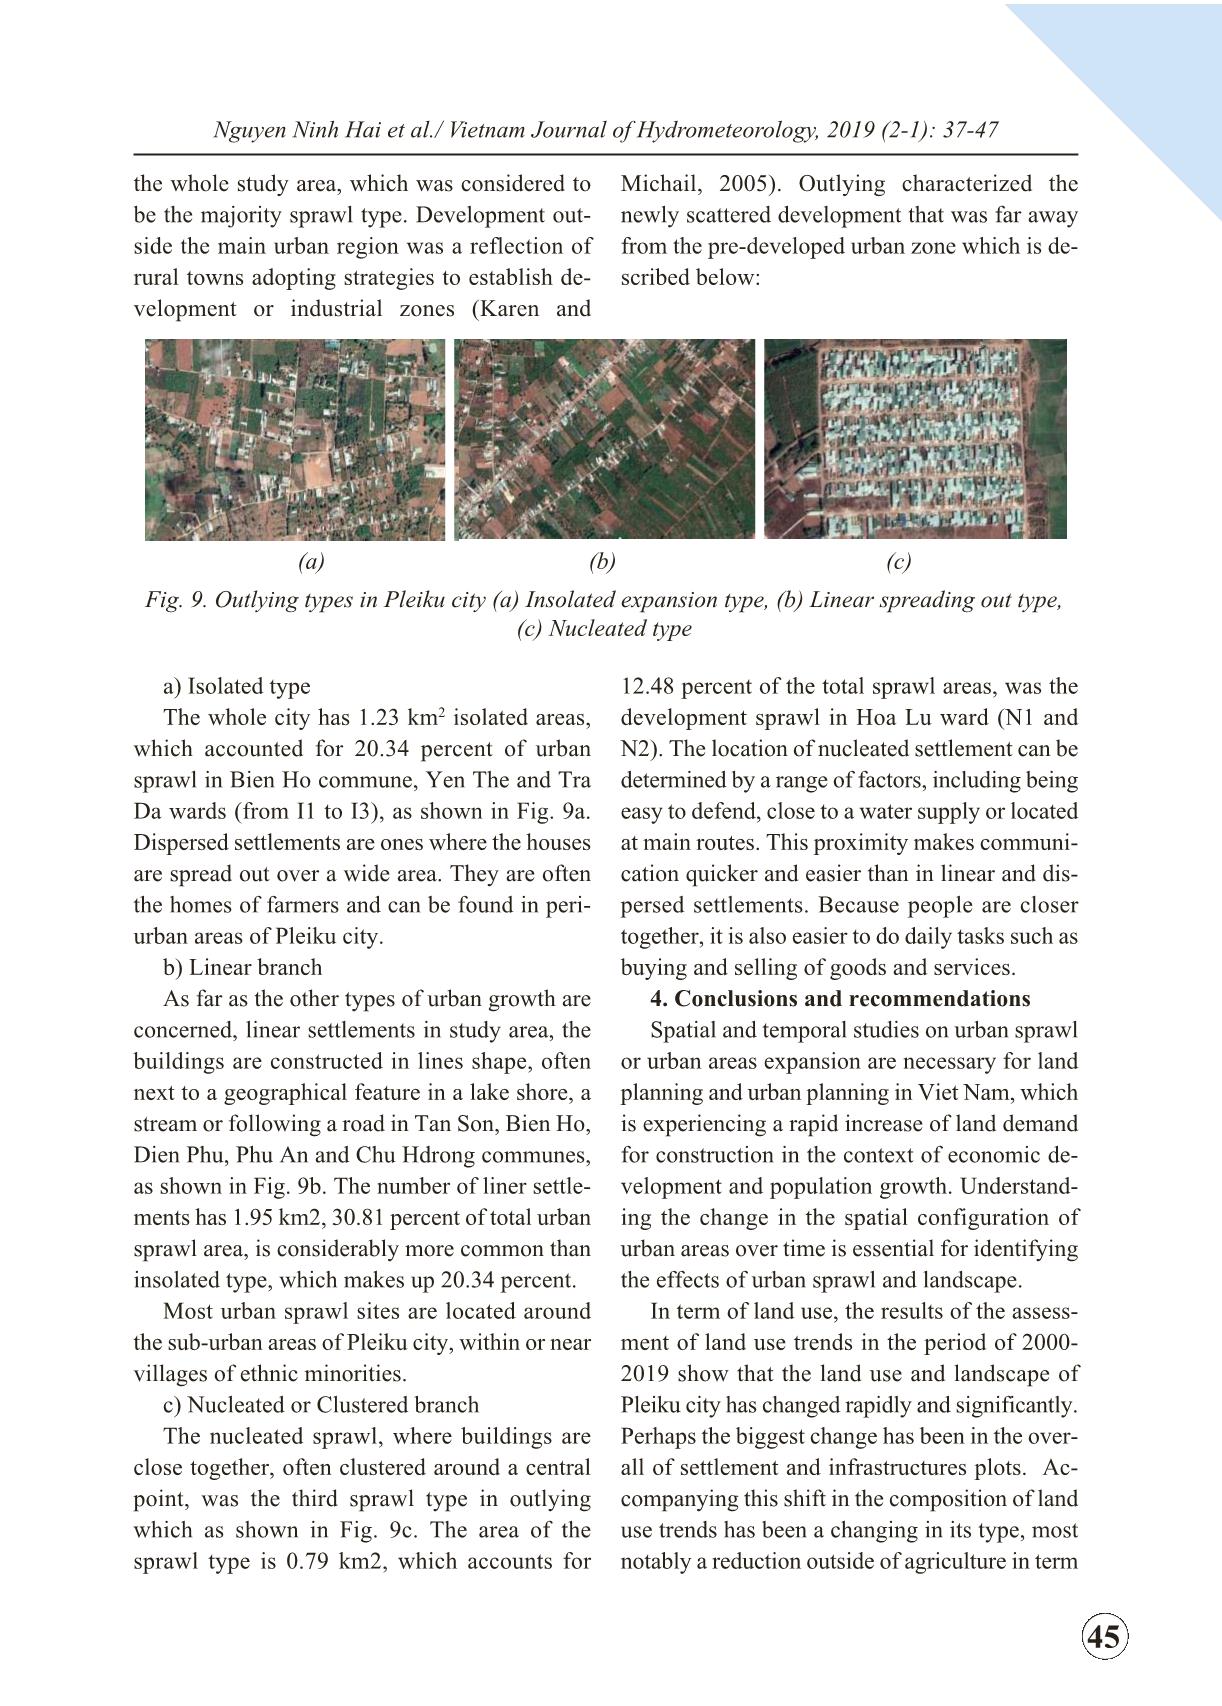 Research on urban sprawl trends and landscape change in Pleiku city, Gia Lai province trang 9